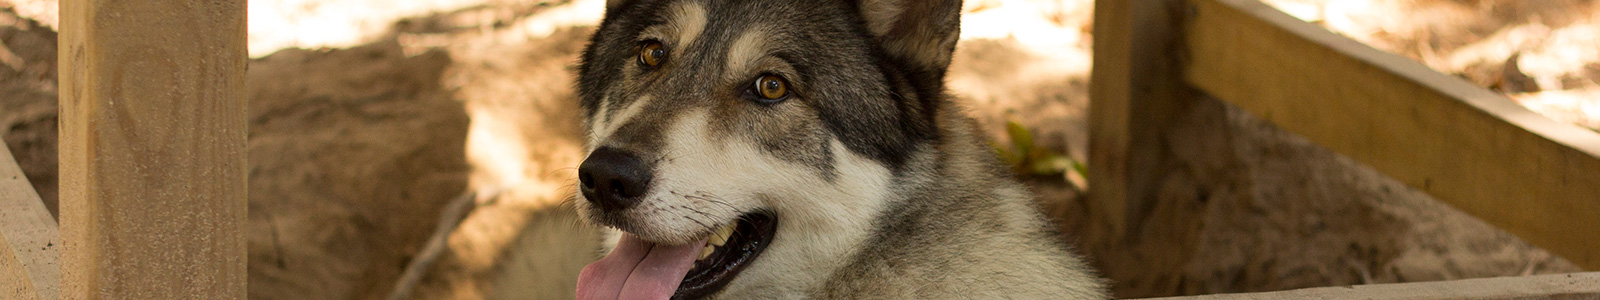 Texas Wolfdog Project WE NEED A HOME Header Image